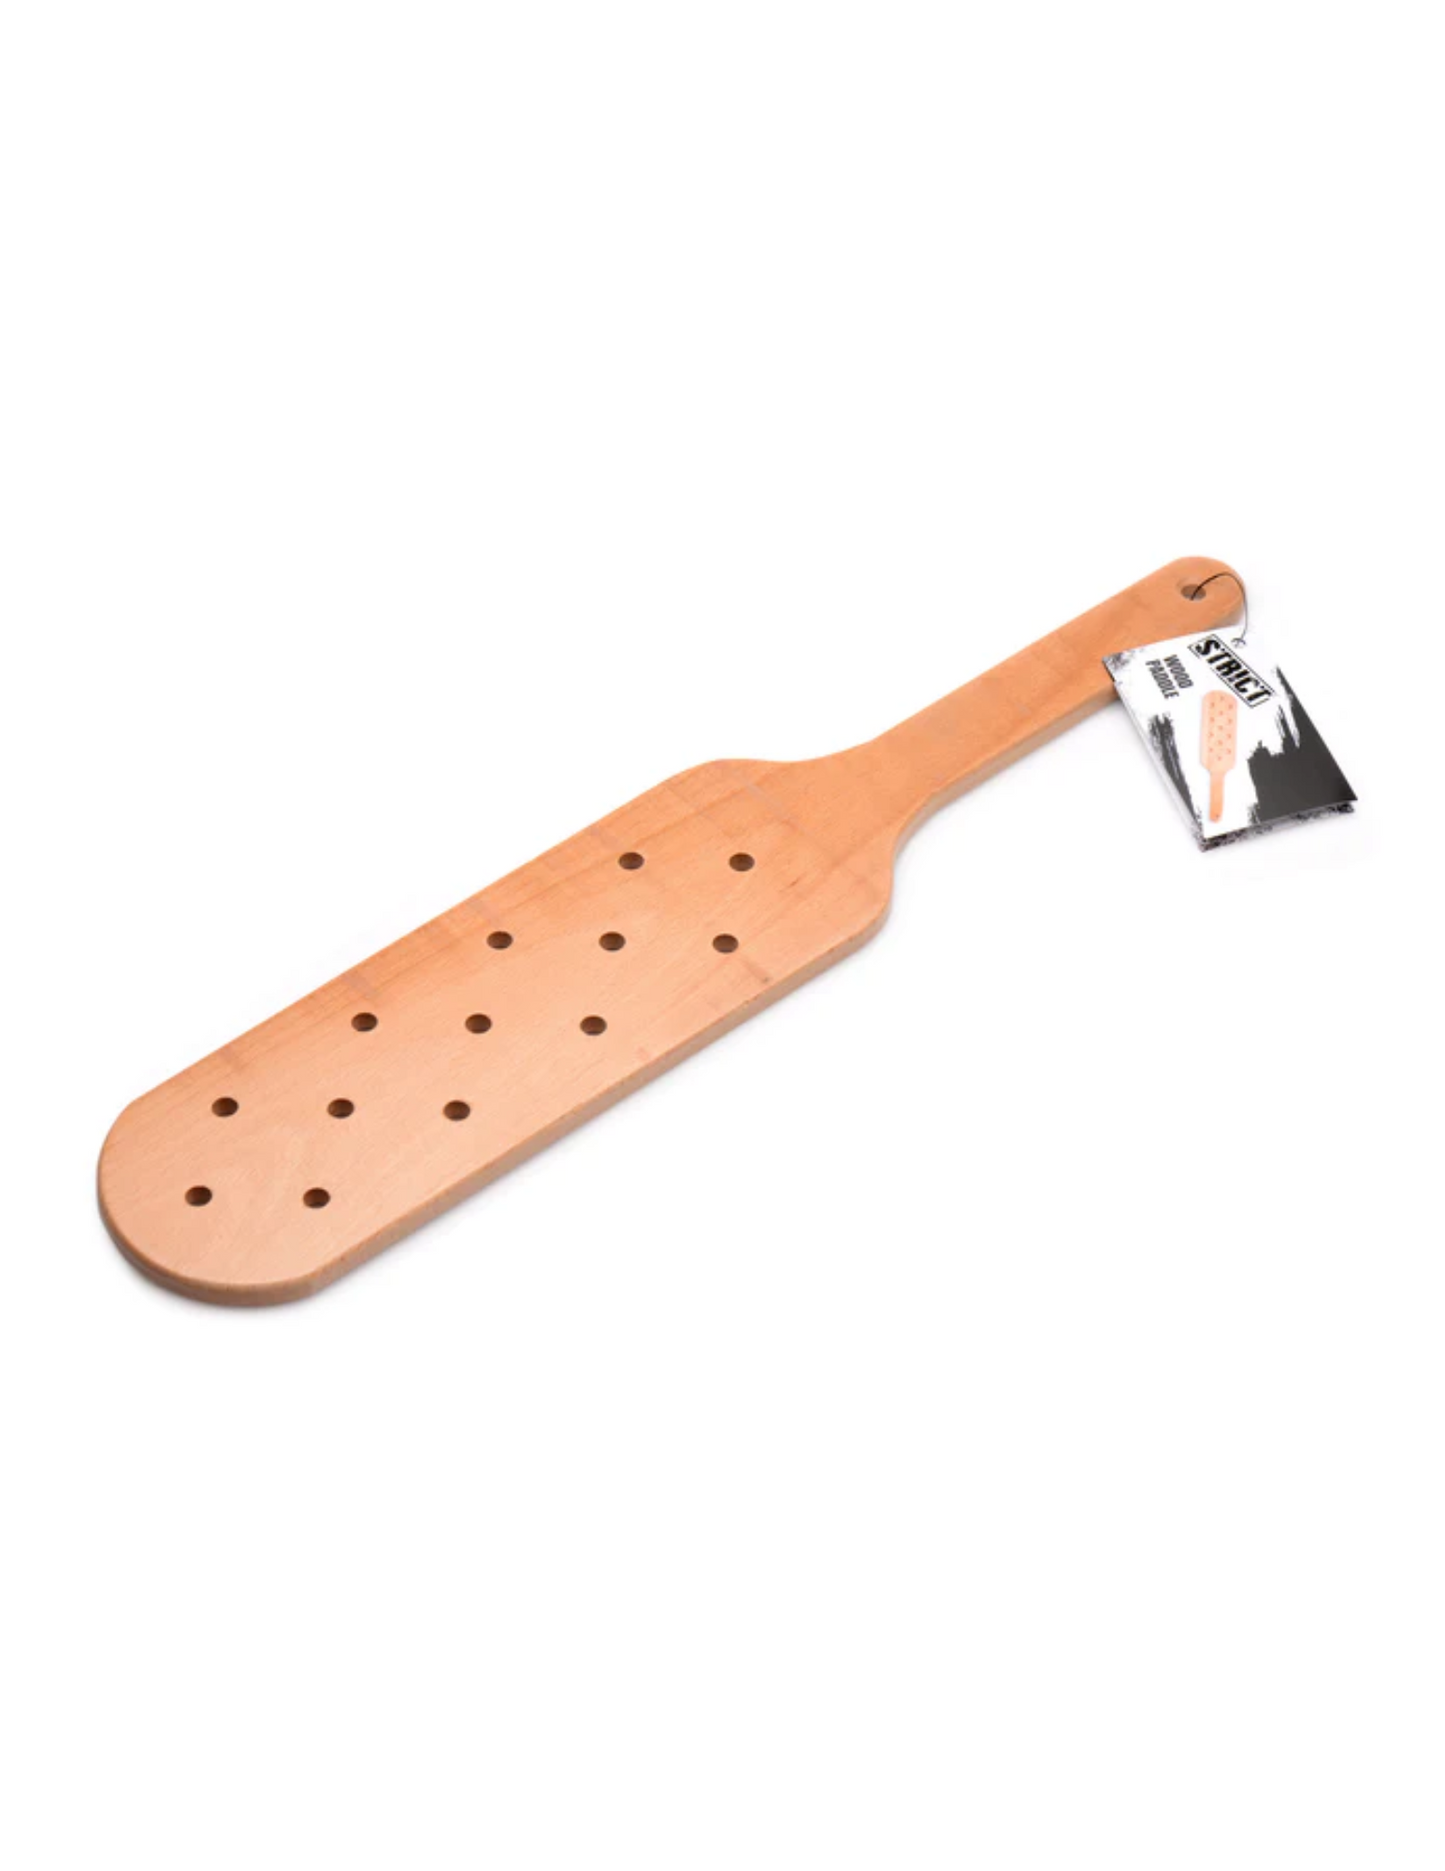 Strict Wooden Paddle (tan).